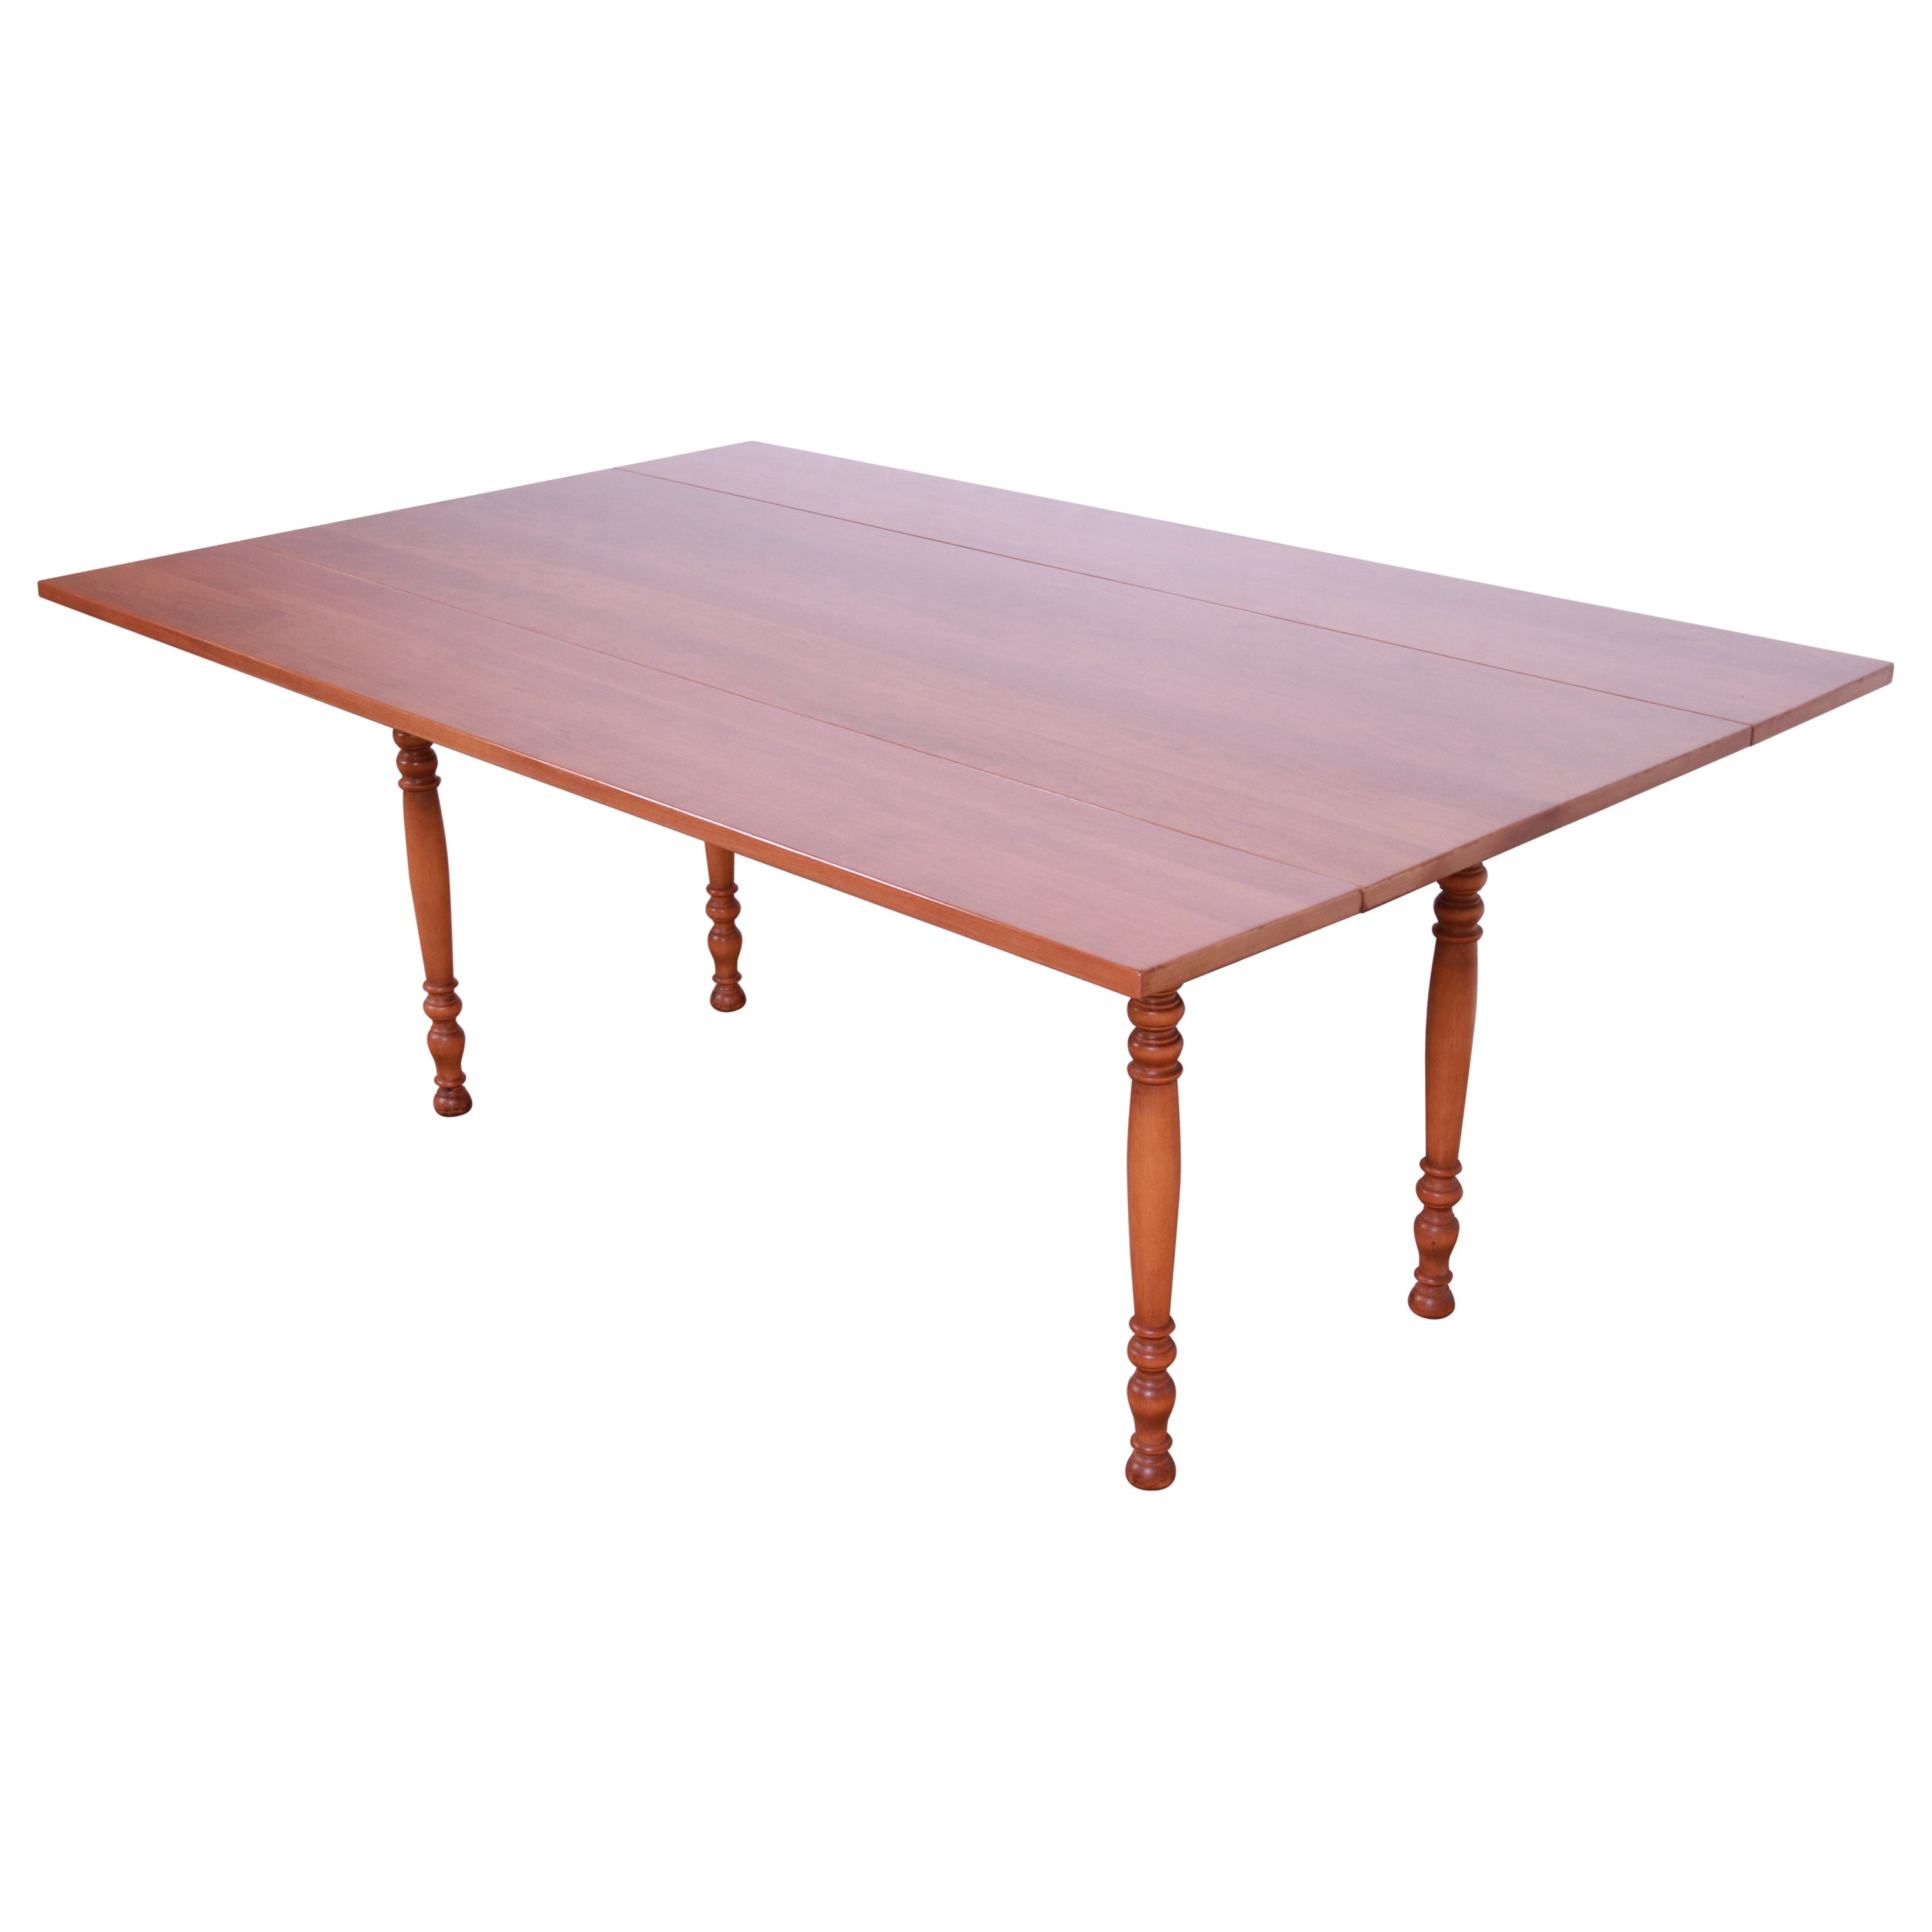 Stickley American Colonial Solid Cherry Wood Harvest Dining Table, 1956 For Sale